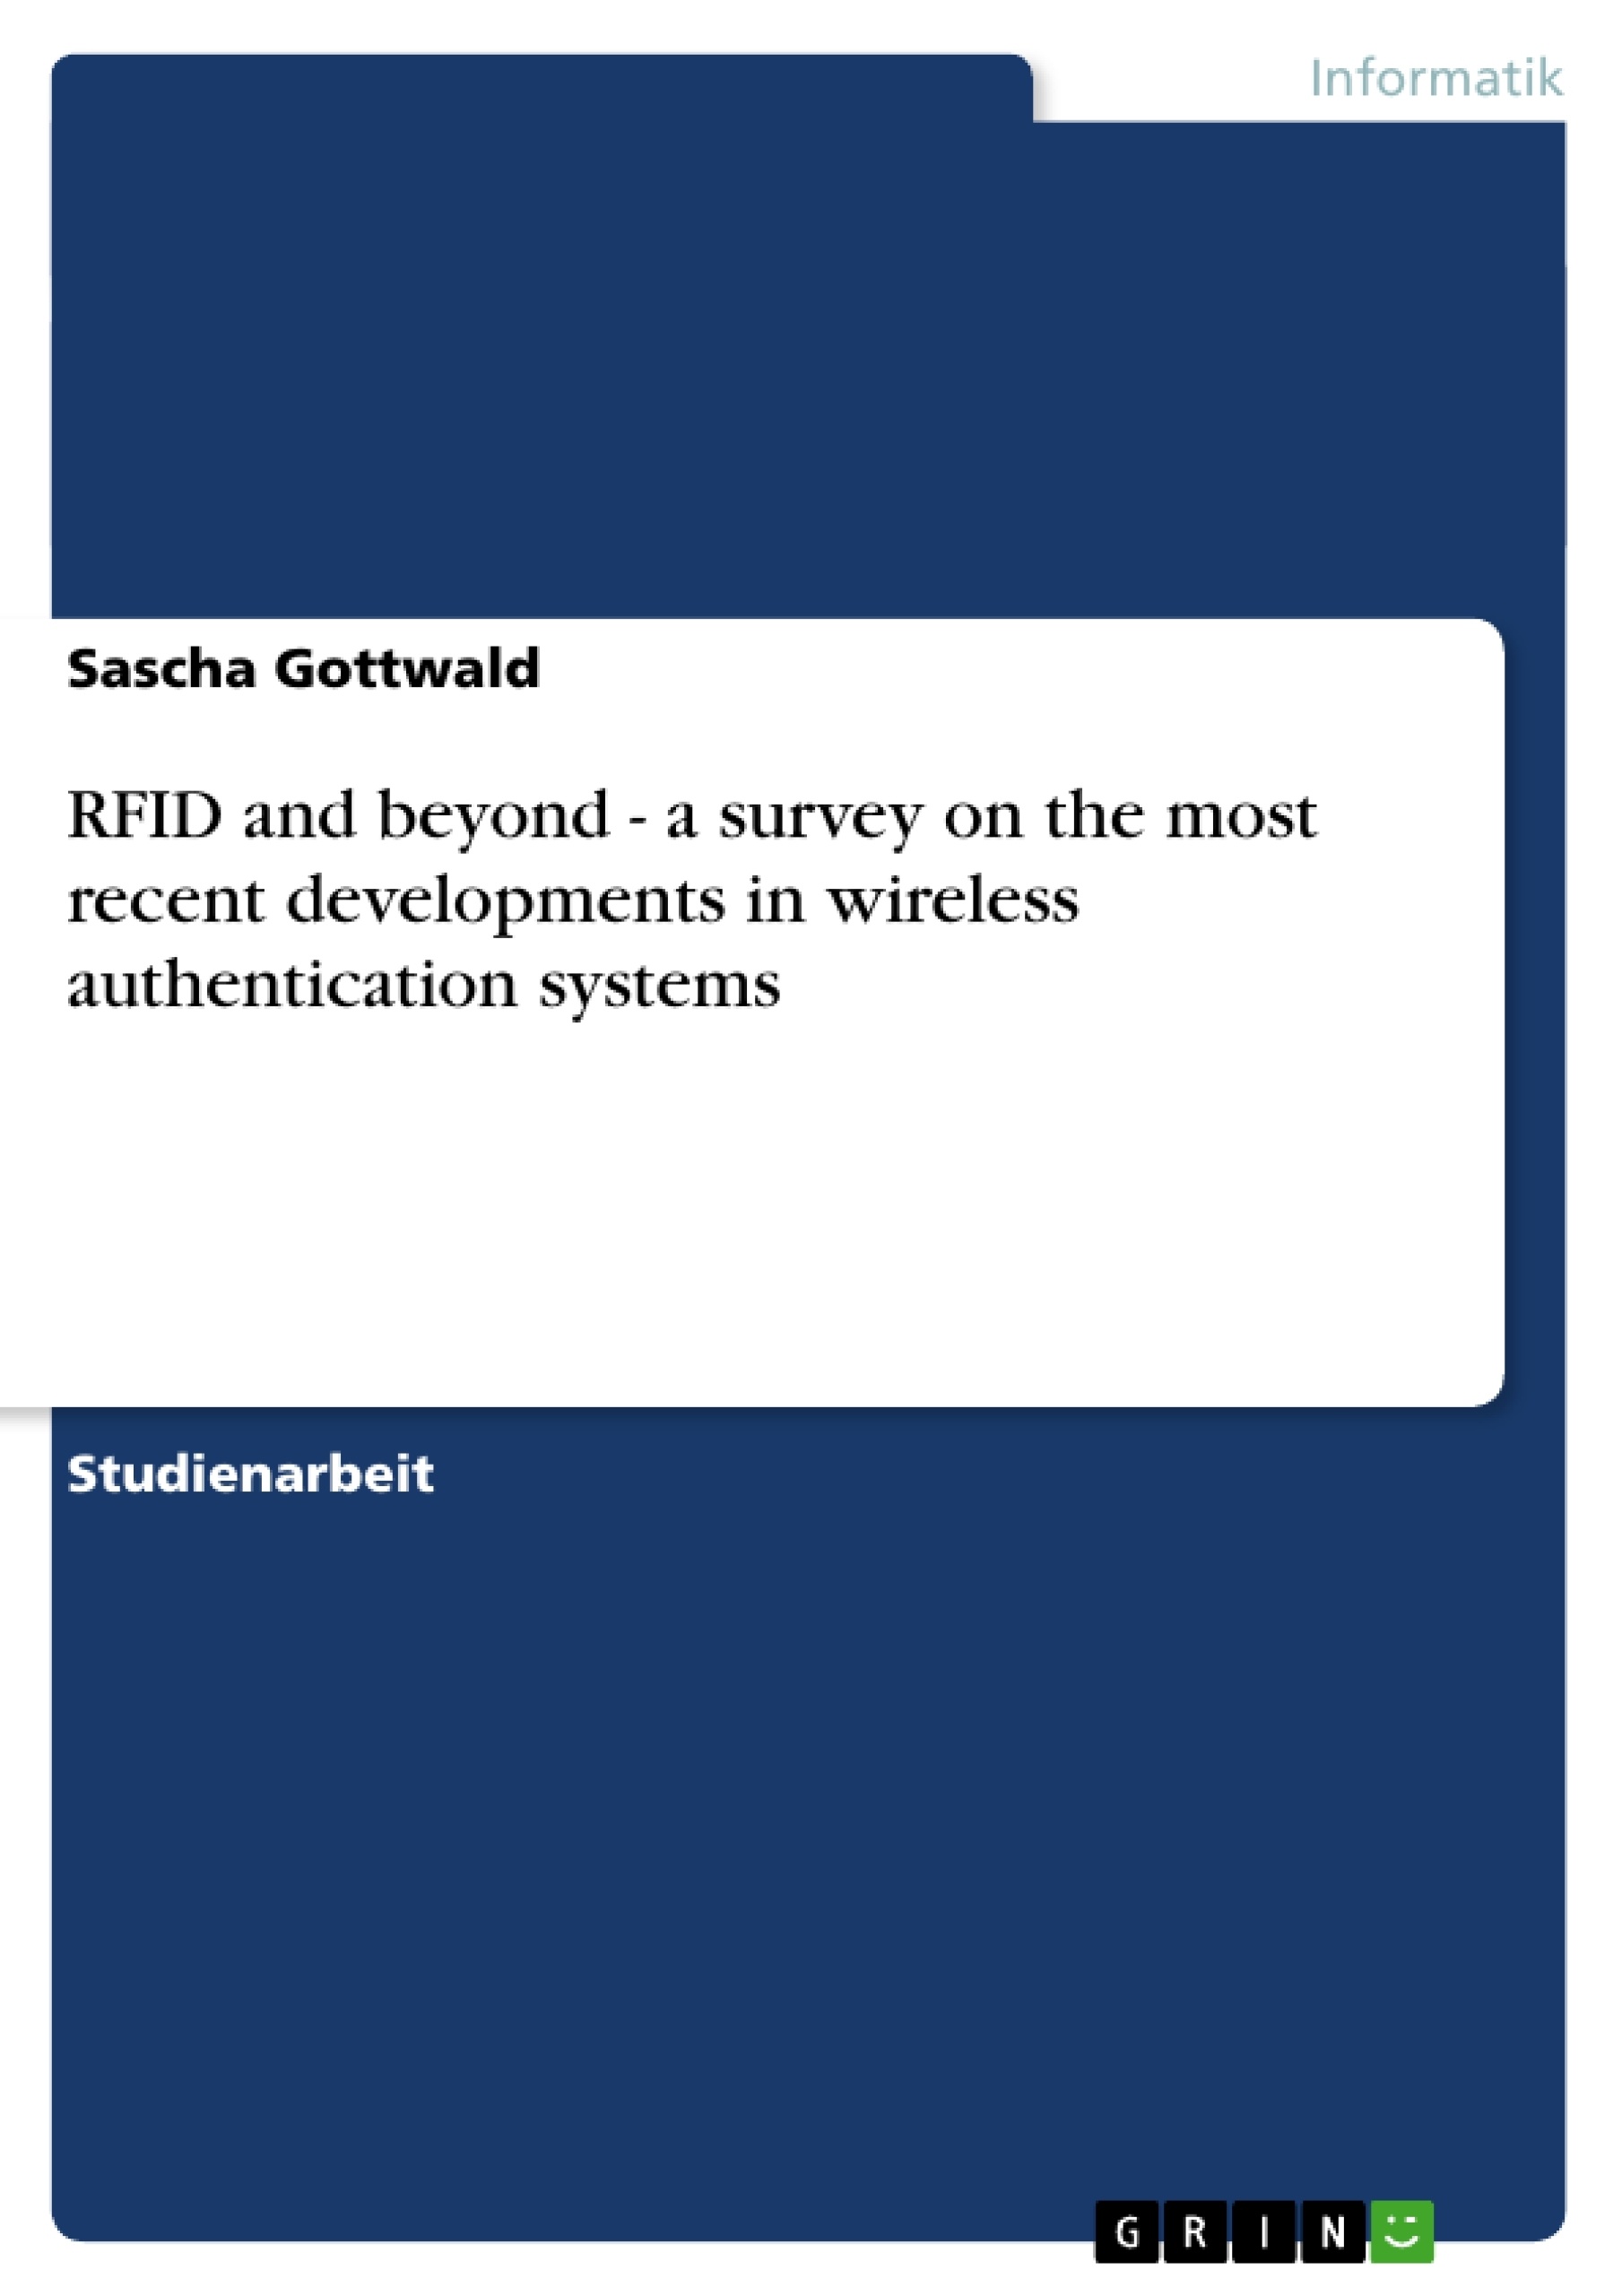 Title: RFID and beyond - a survey on the most recent developments in wireless authentication systems